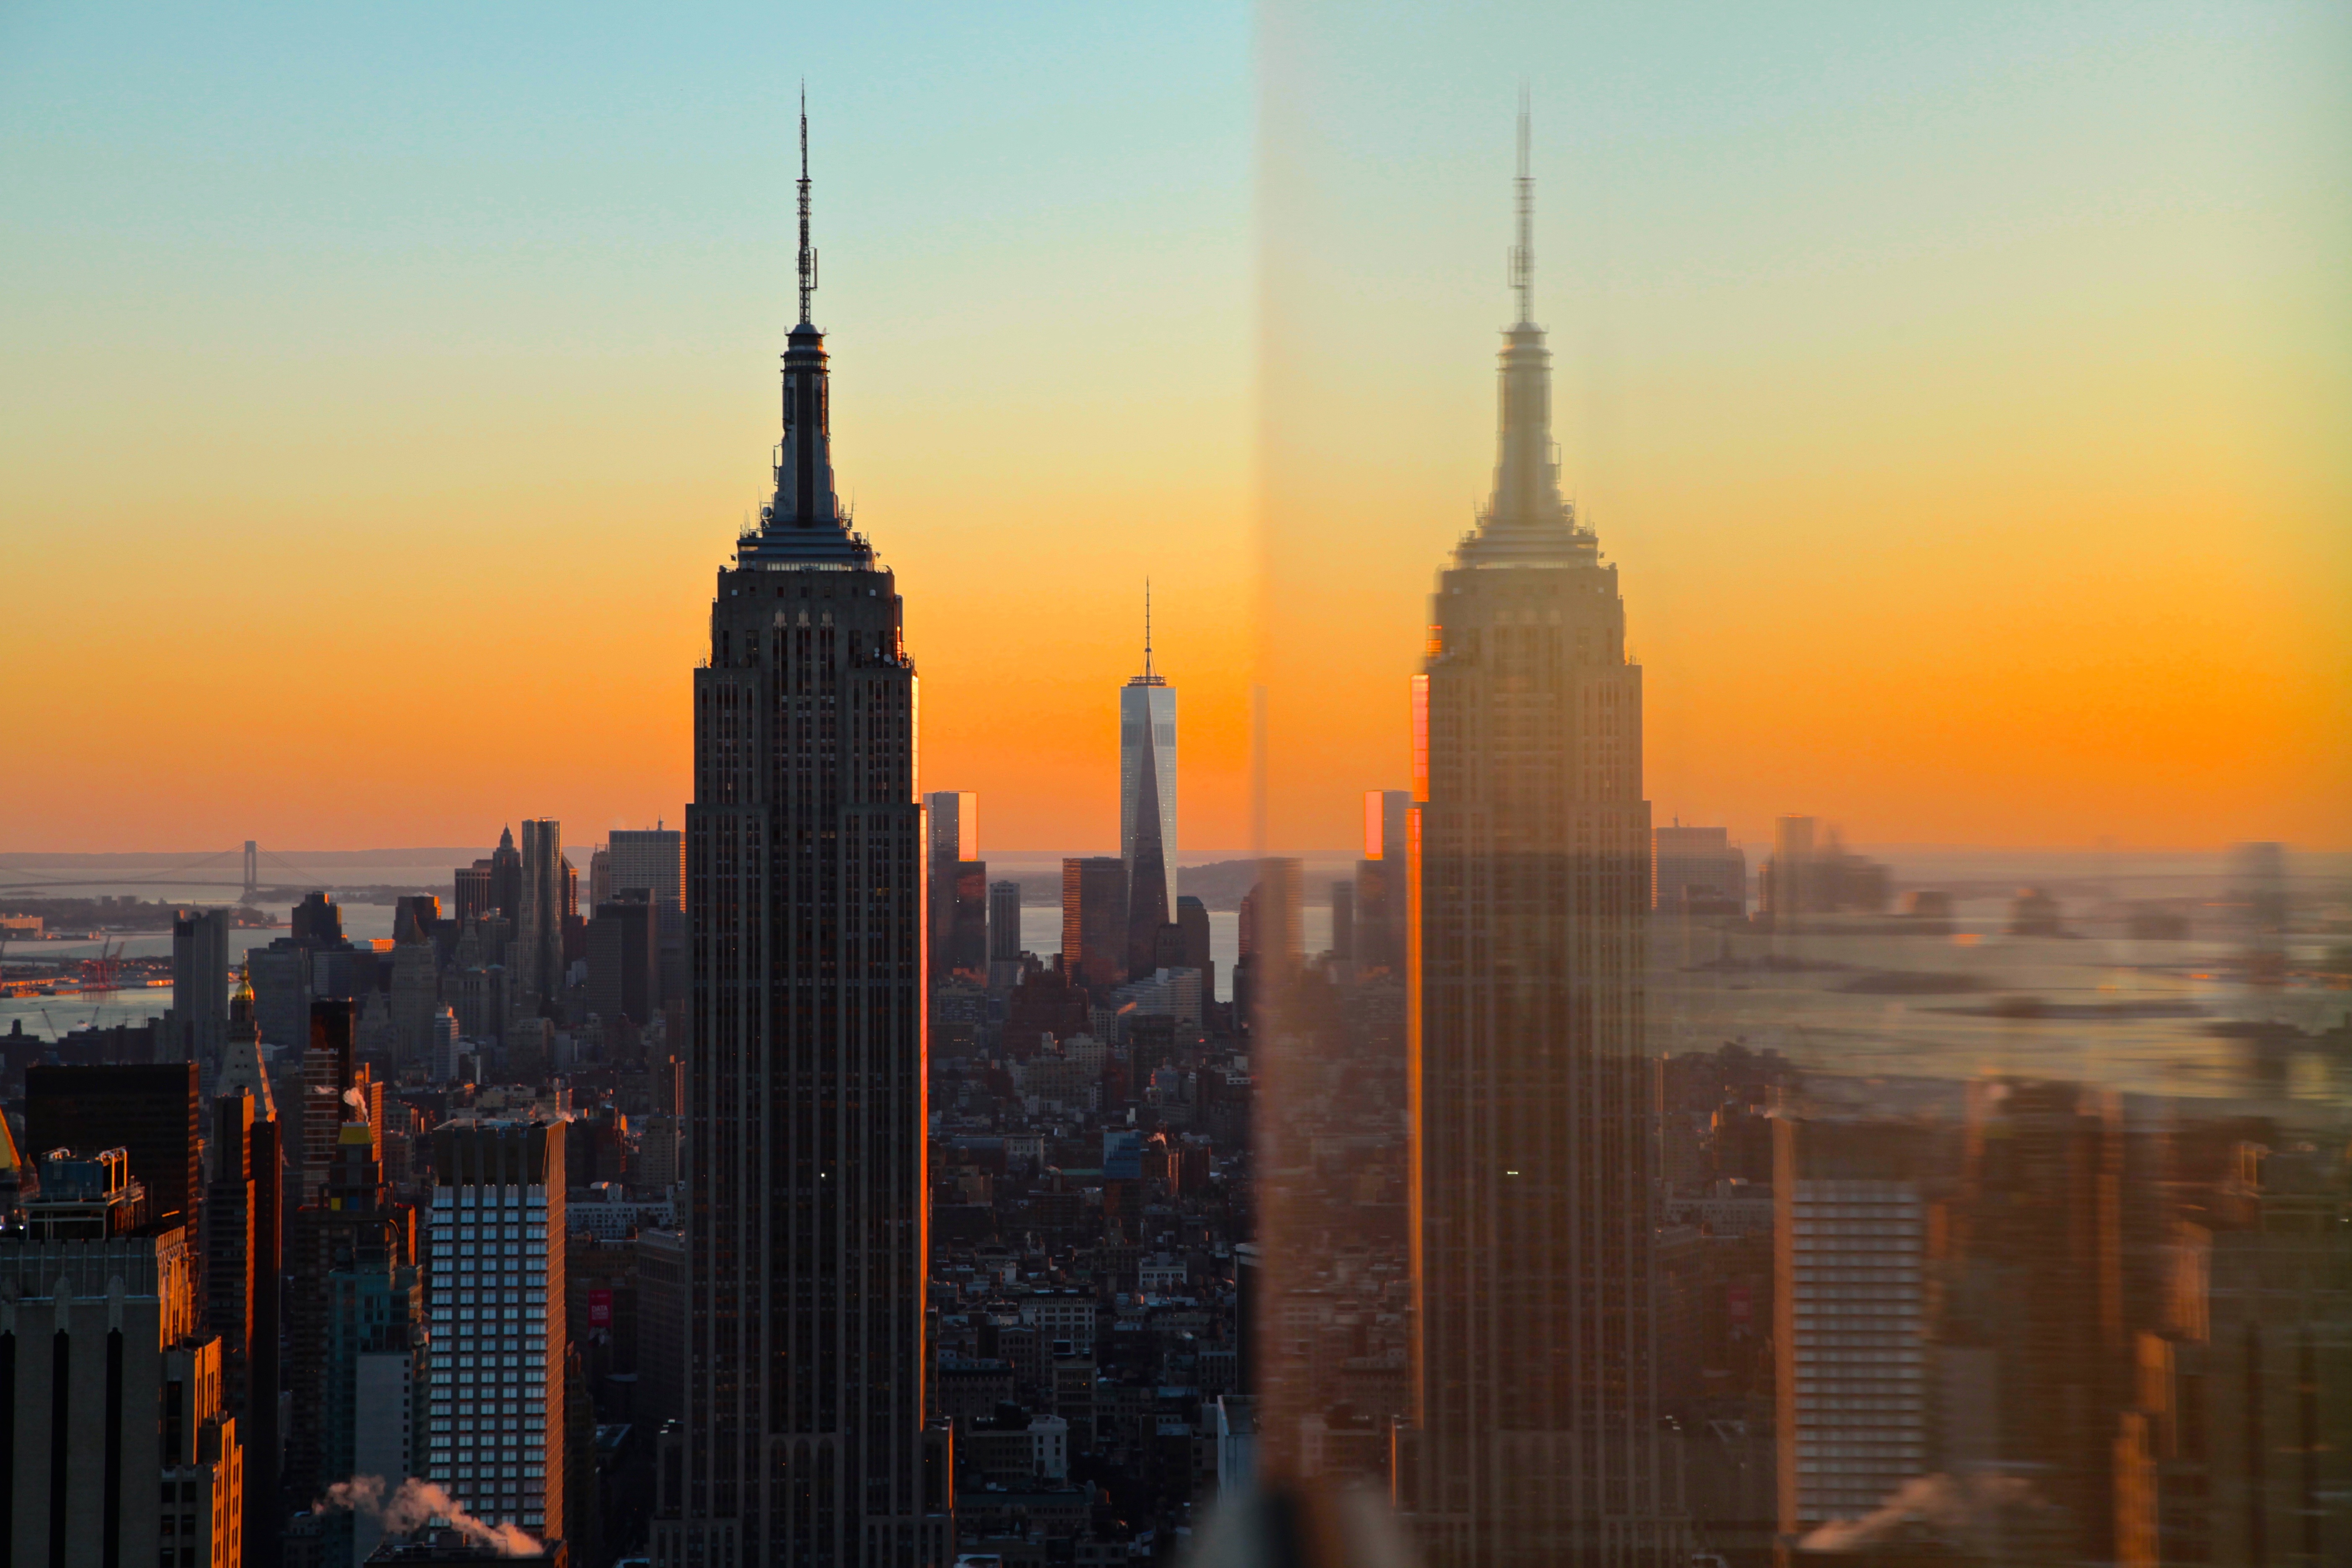 Wallpapers metropolis nyc empire state building on the desktop